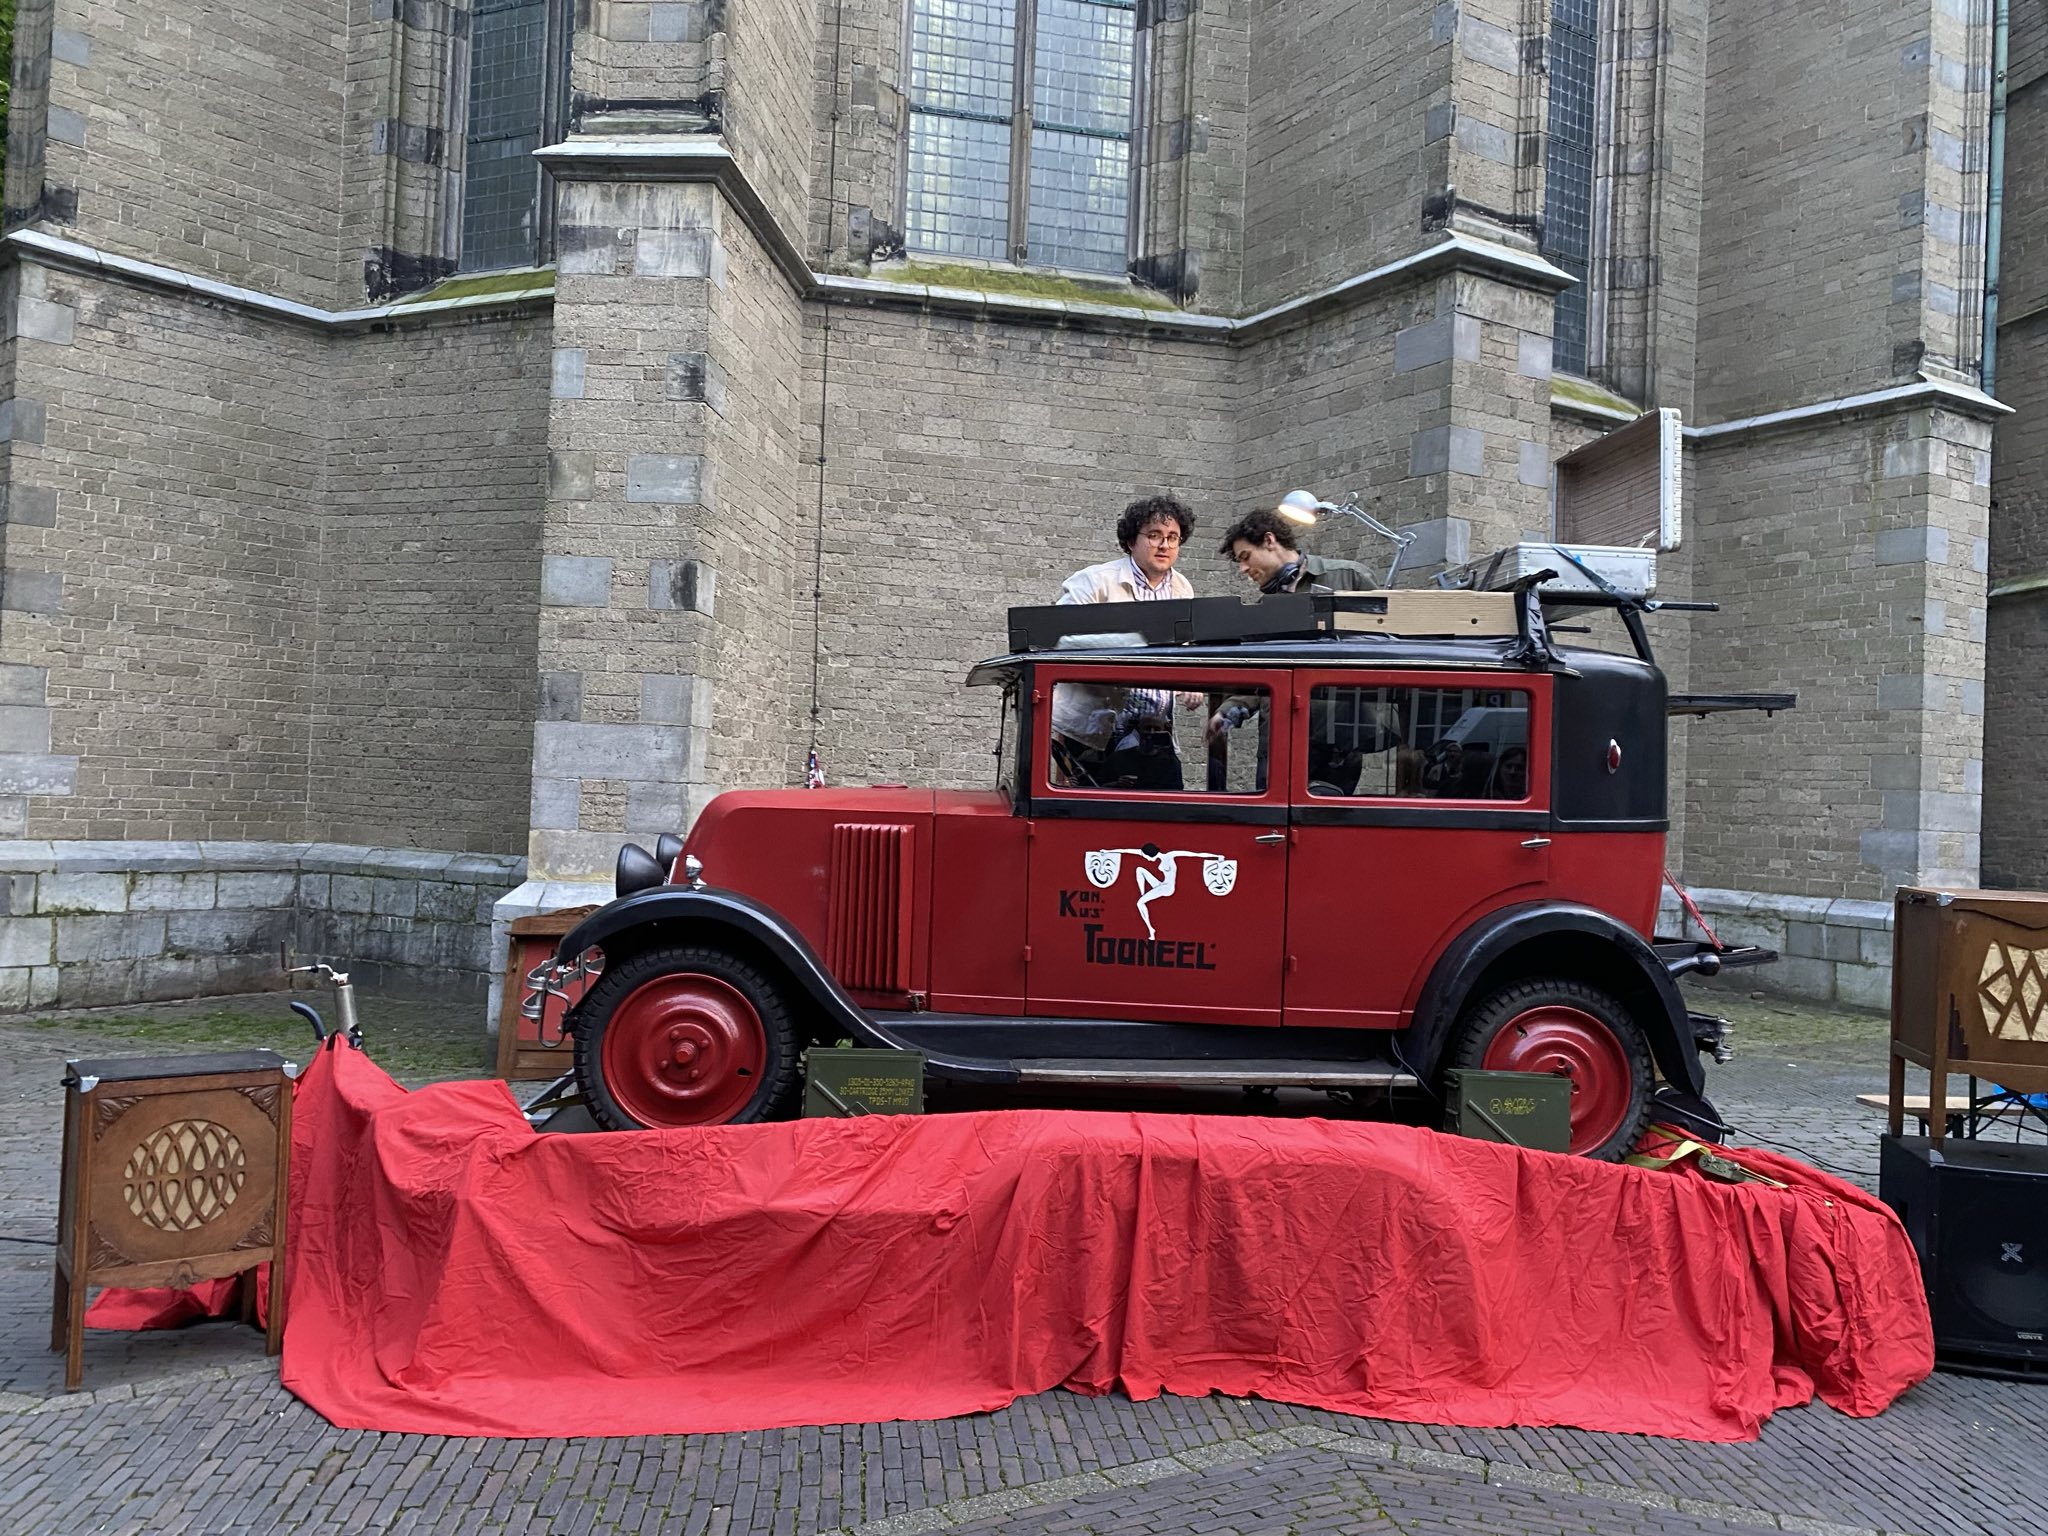 A DJ set being played out of the top of an old red car